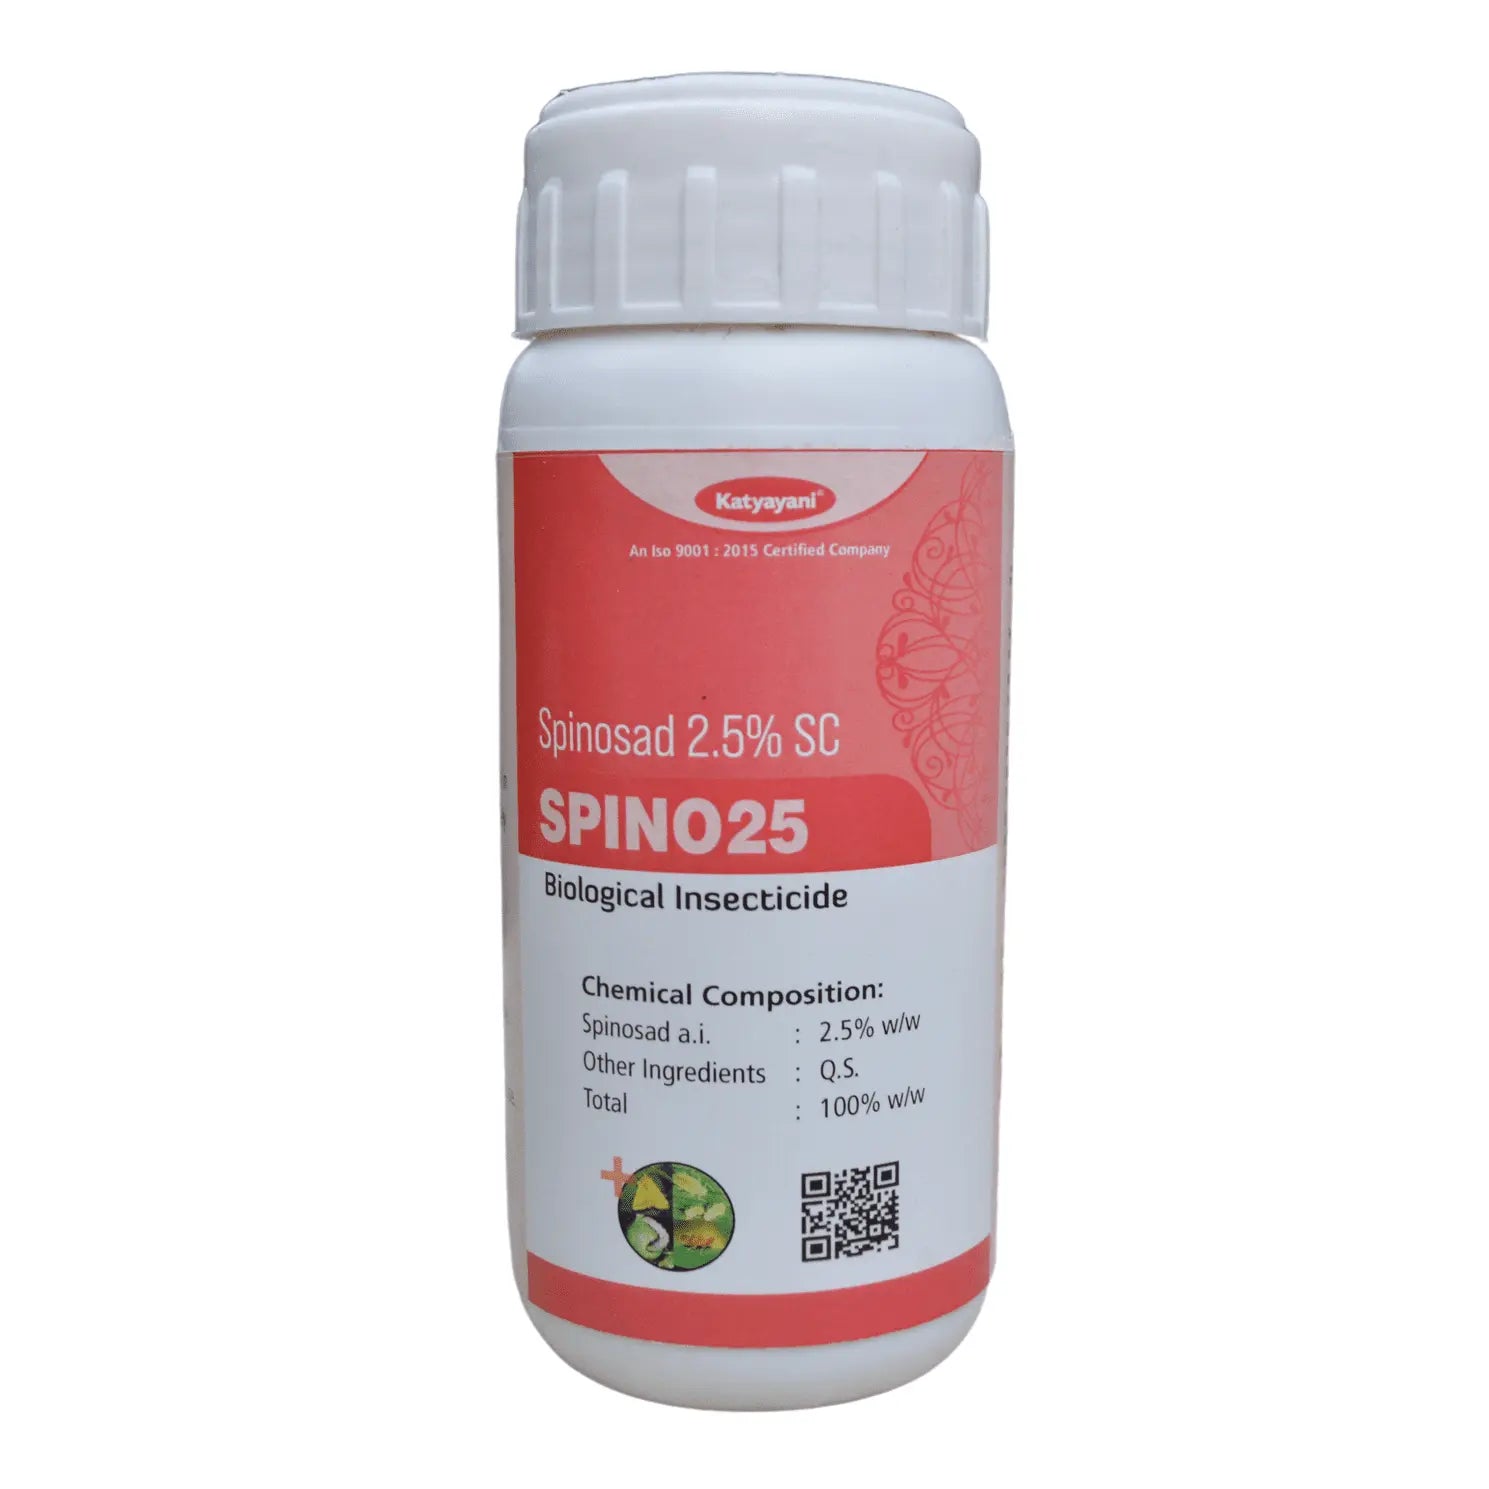 Katyayani Spino 25 | Spinosad 2.5% SC | Chemical Insecticide